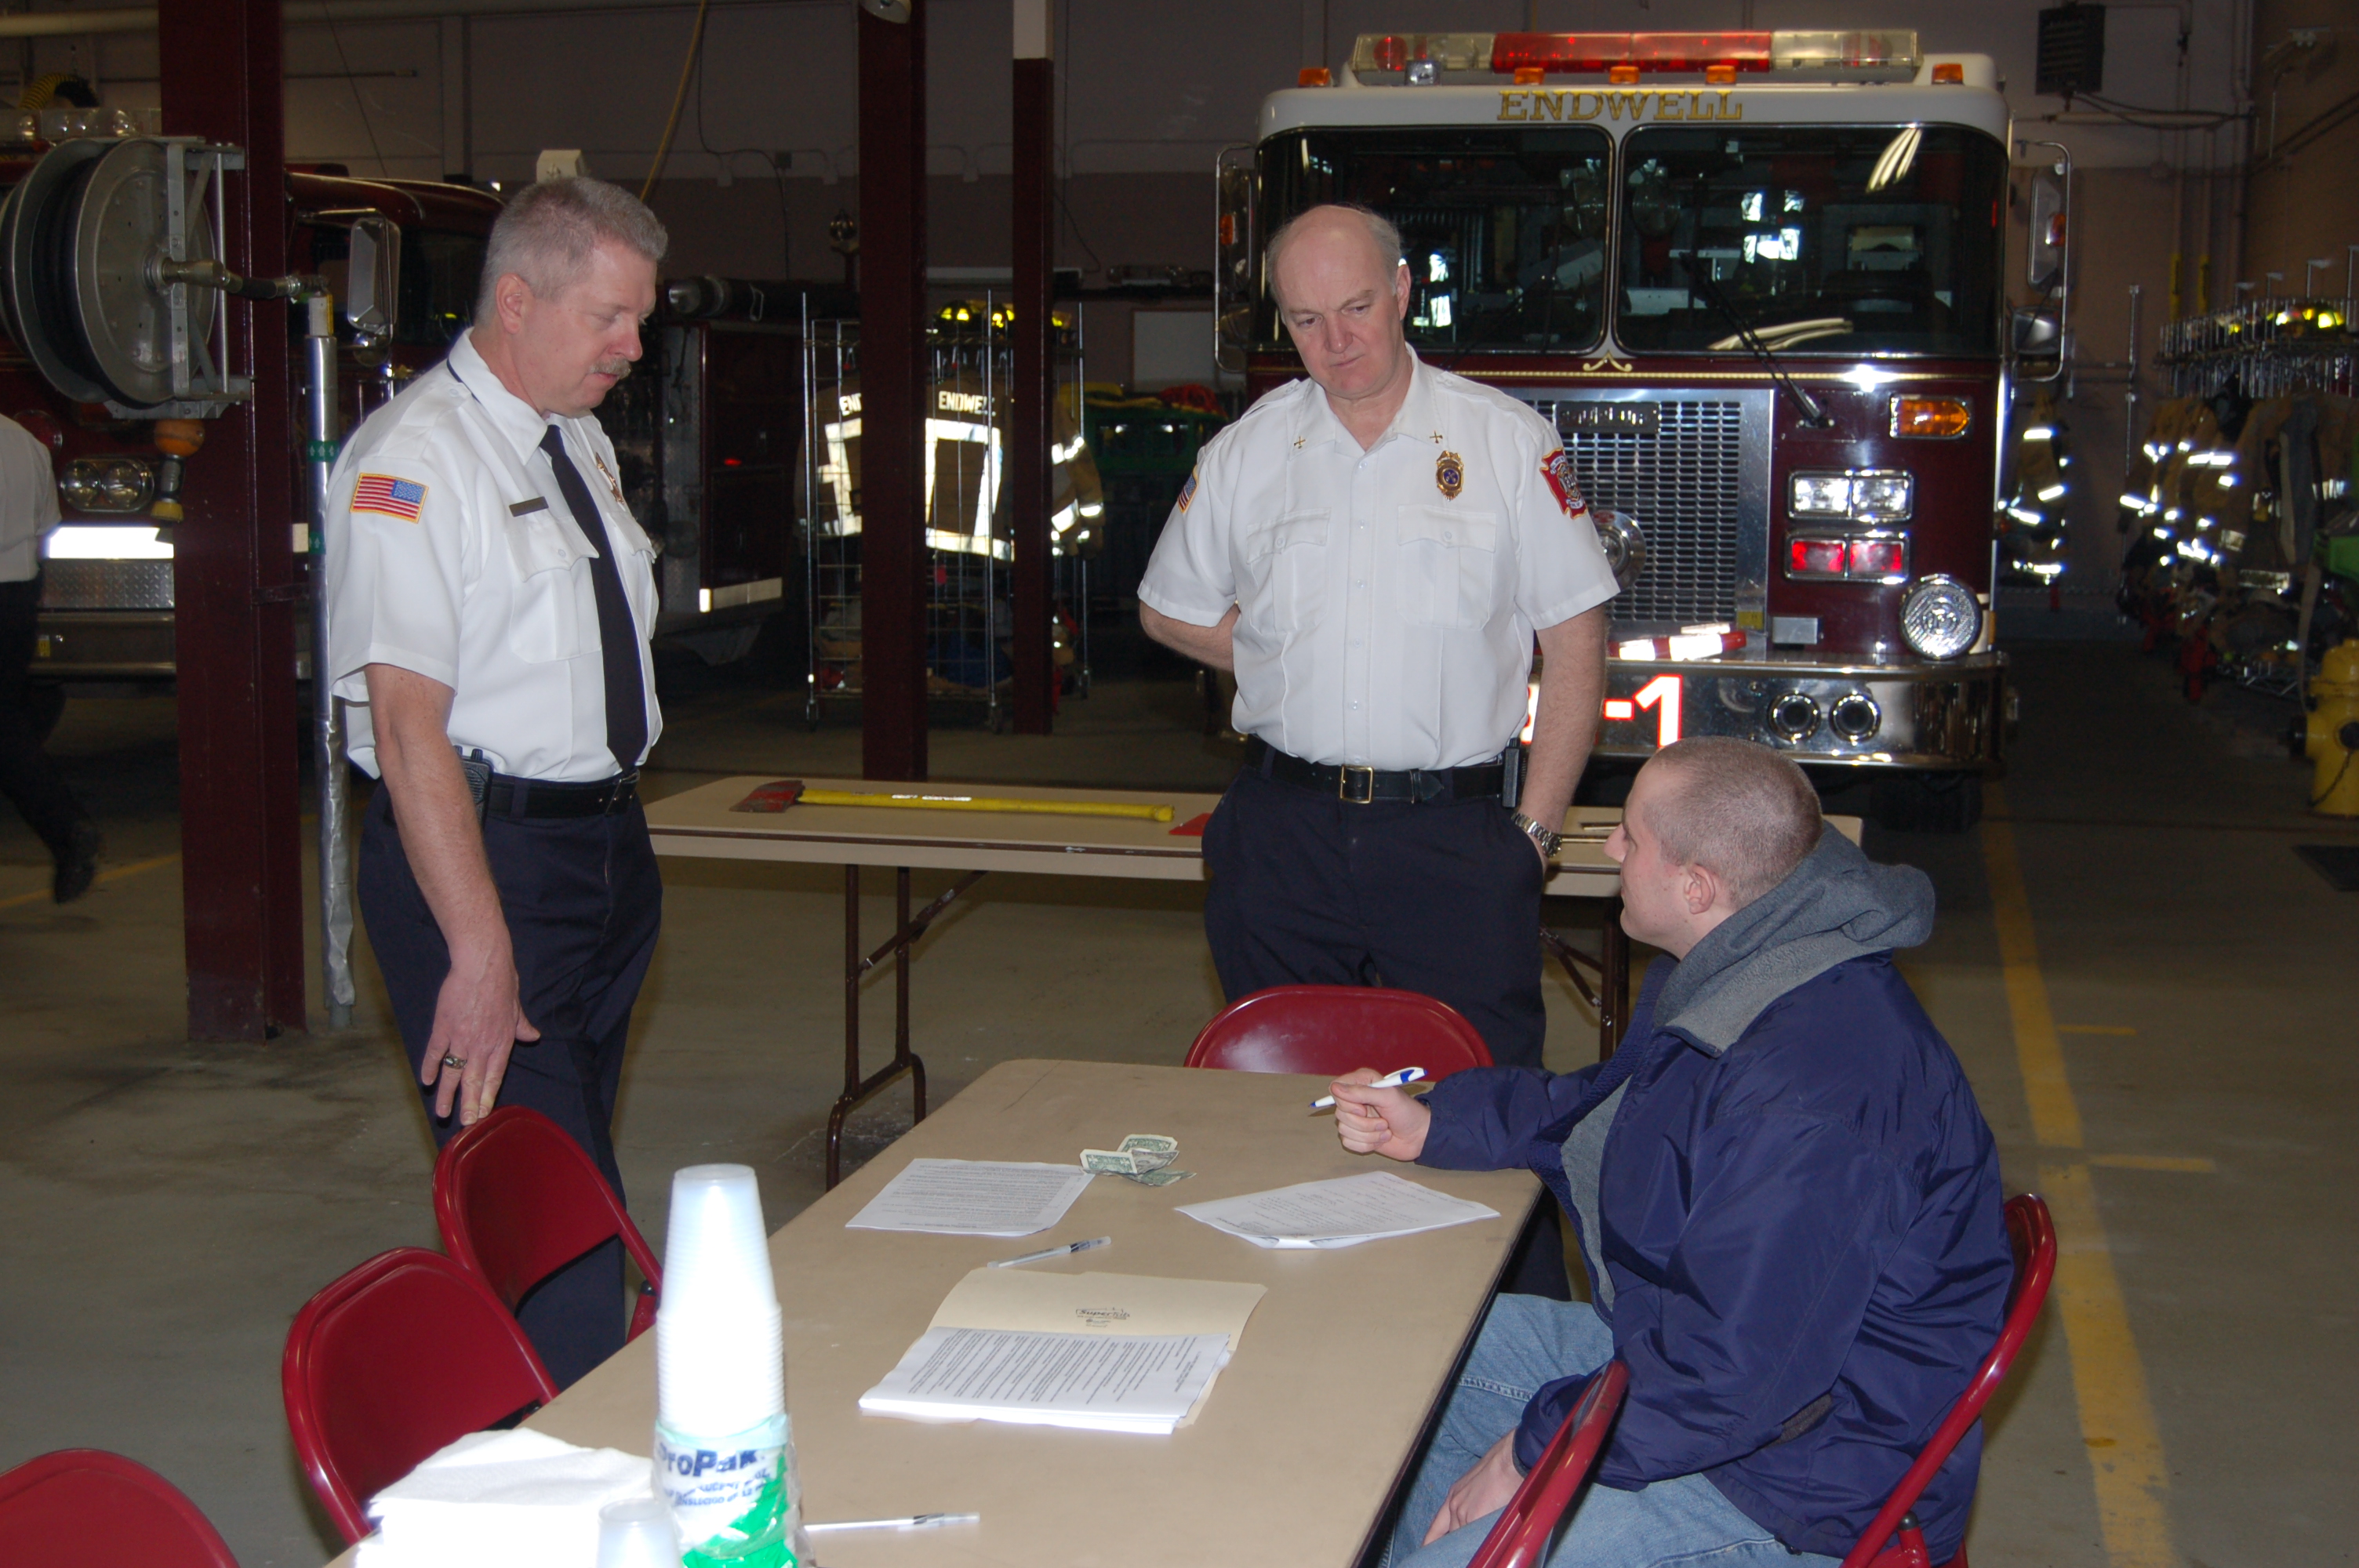 01-15-11  Other - Open House